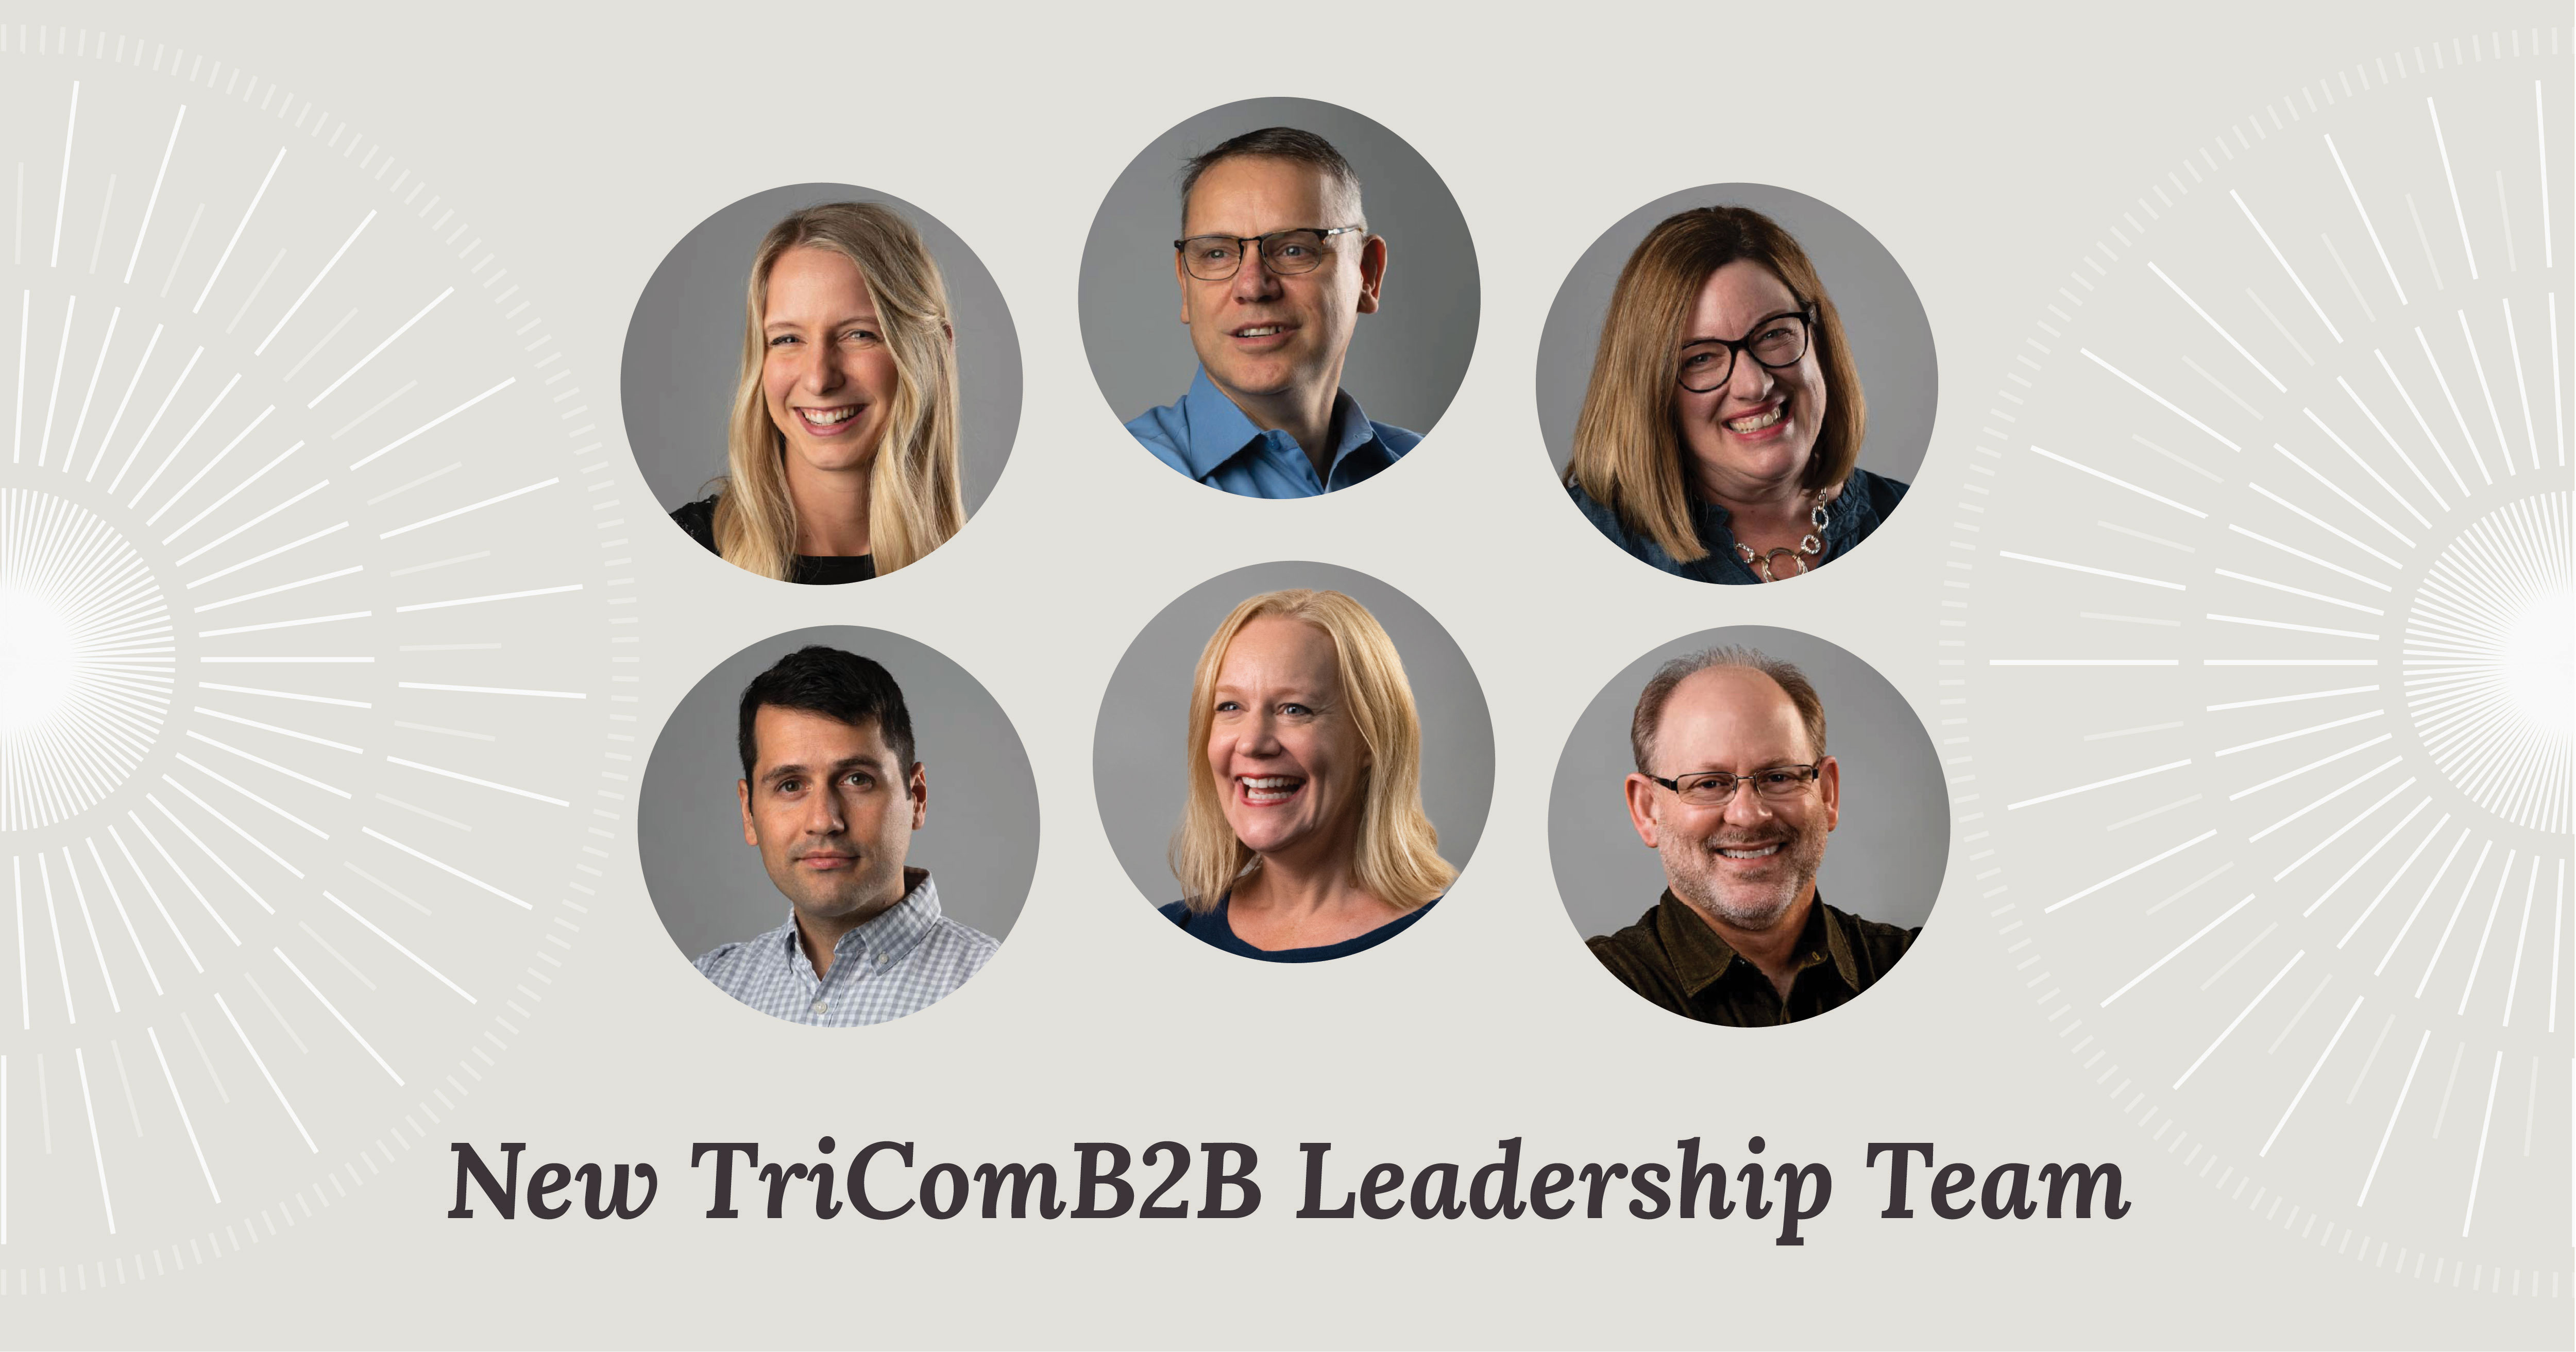 TriComB2B's new leadership team featuring Whitney Alexander, Mike Bell, Michelle Crawley, Andrew Humphrey, Erin Rogers and Greg Setter